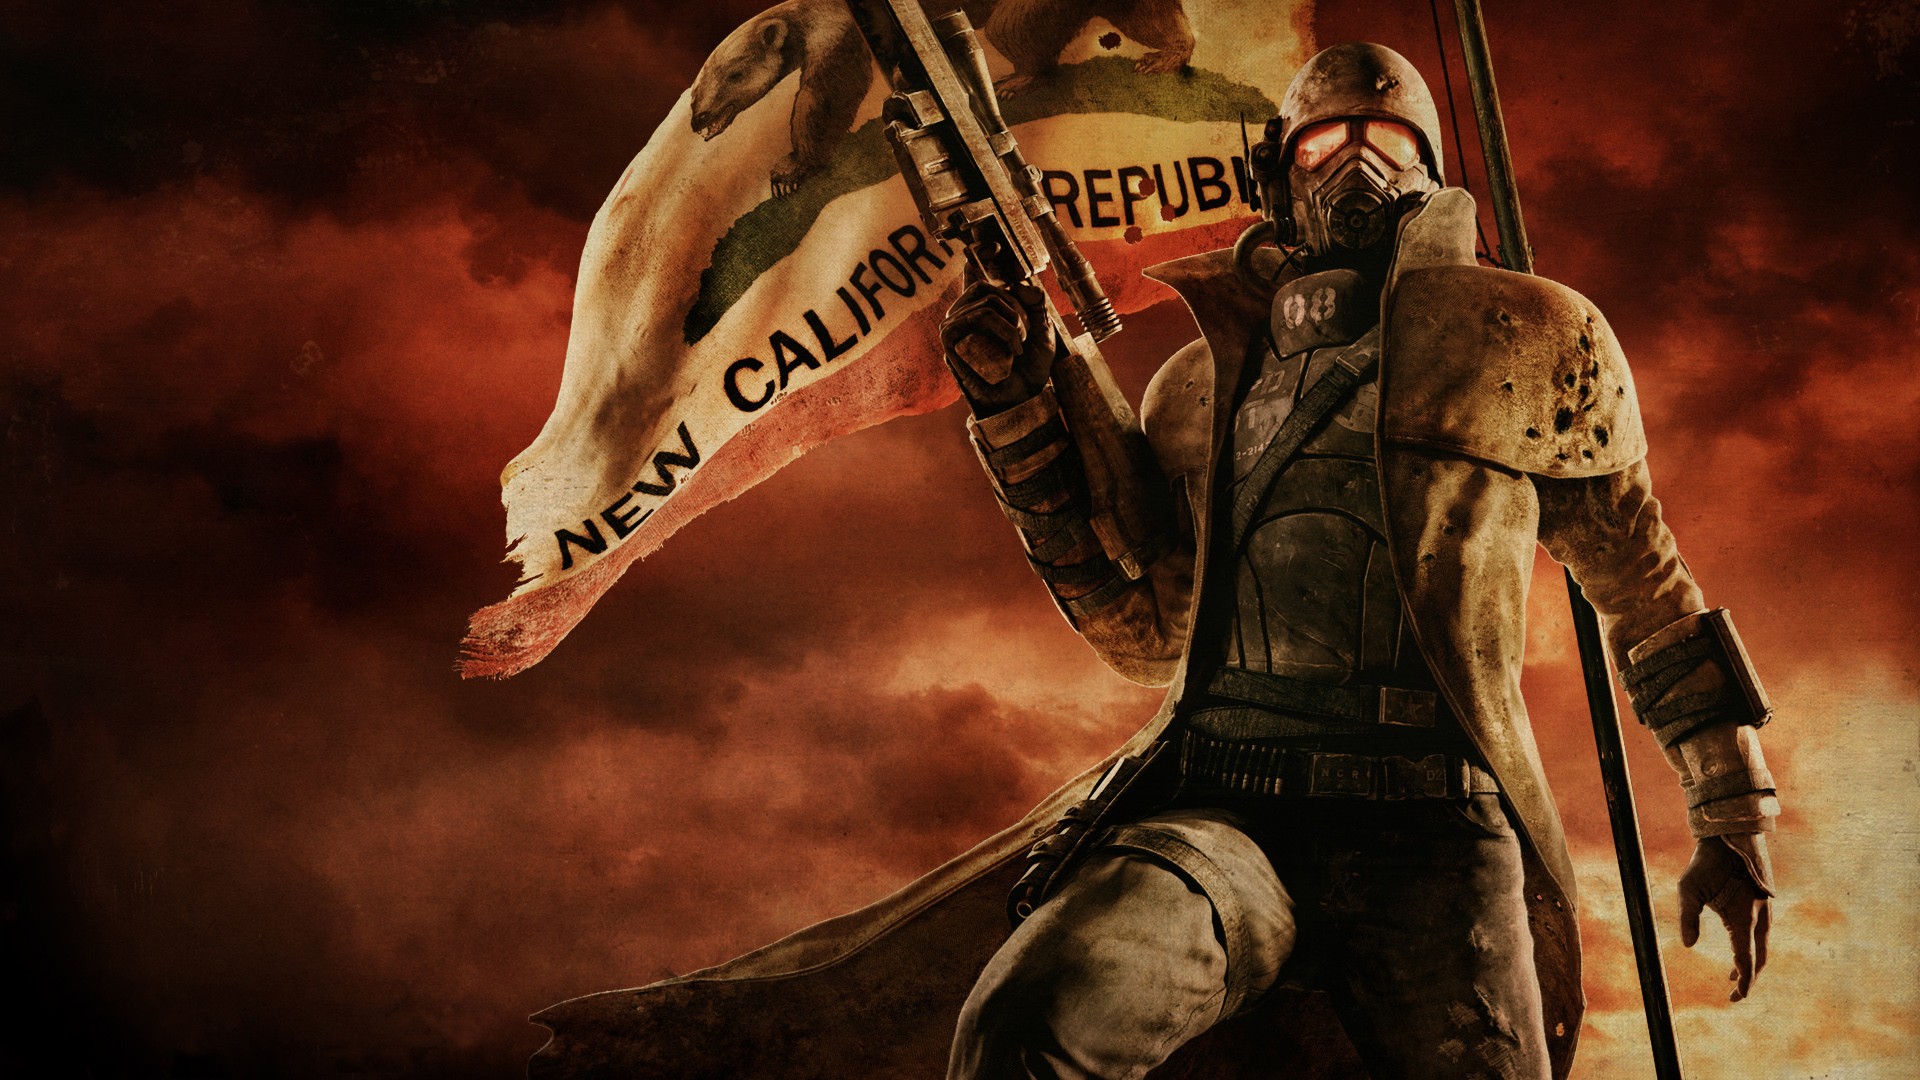 Fallout, Fallout New Vegas, NCR, Rangers, Snipers Wallpaper